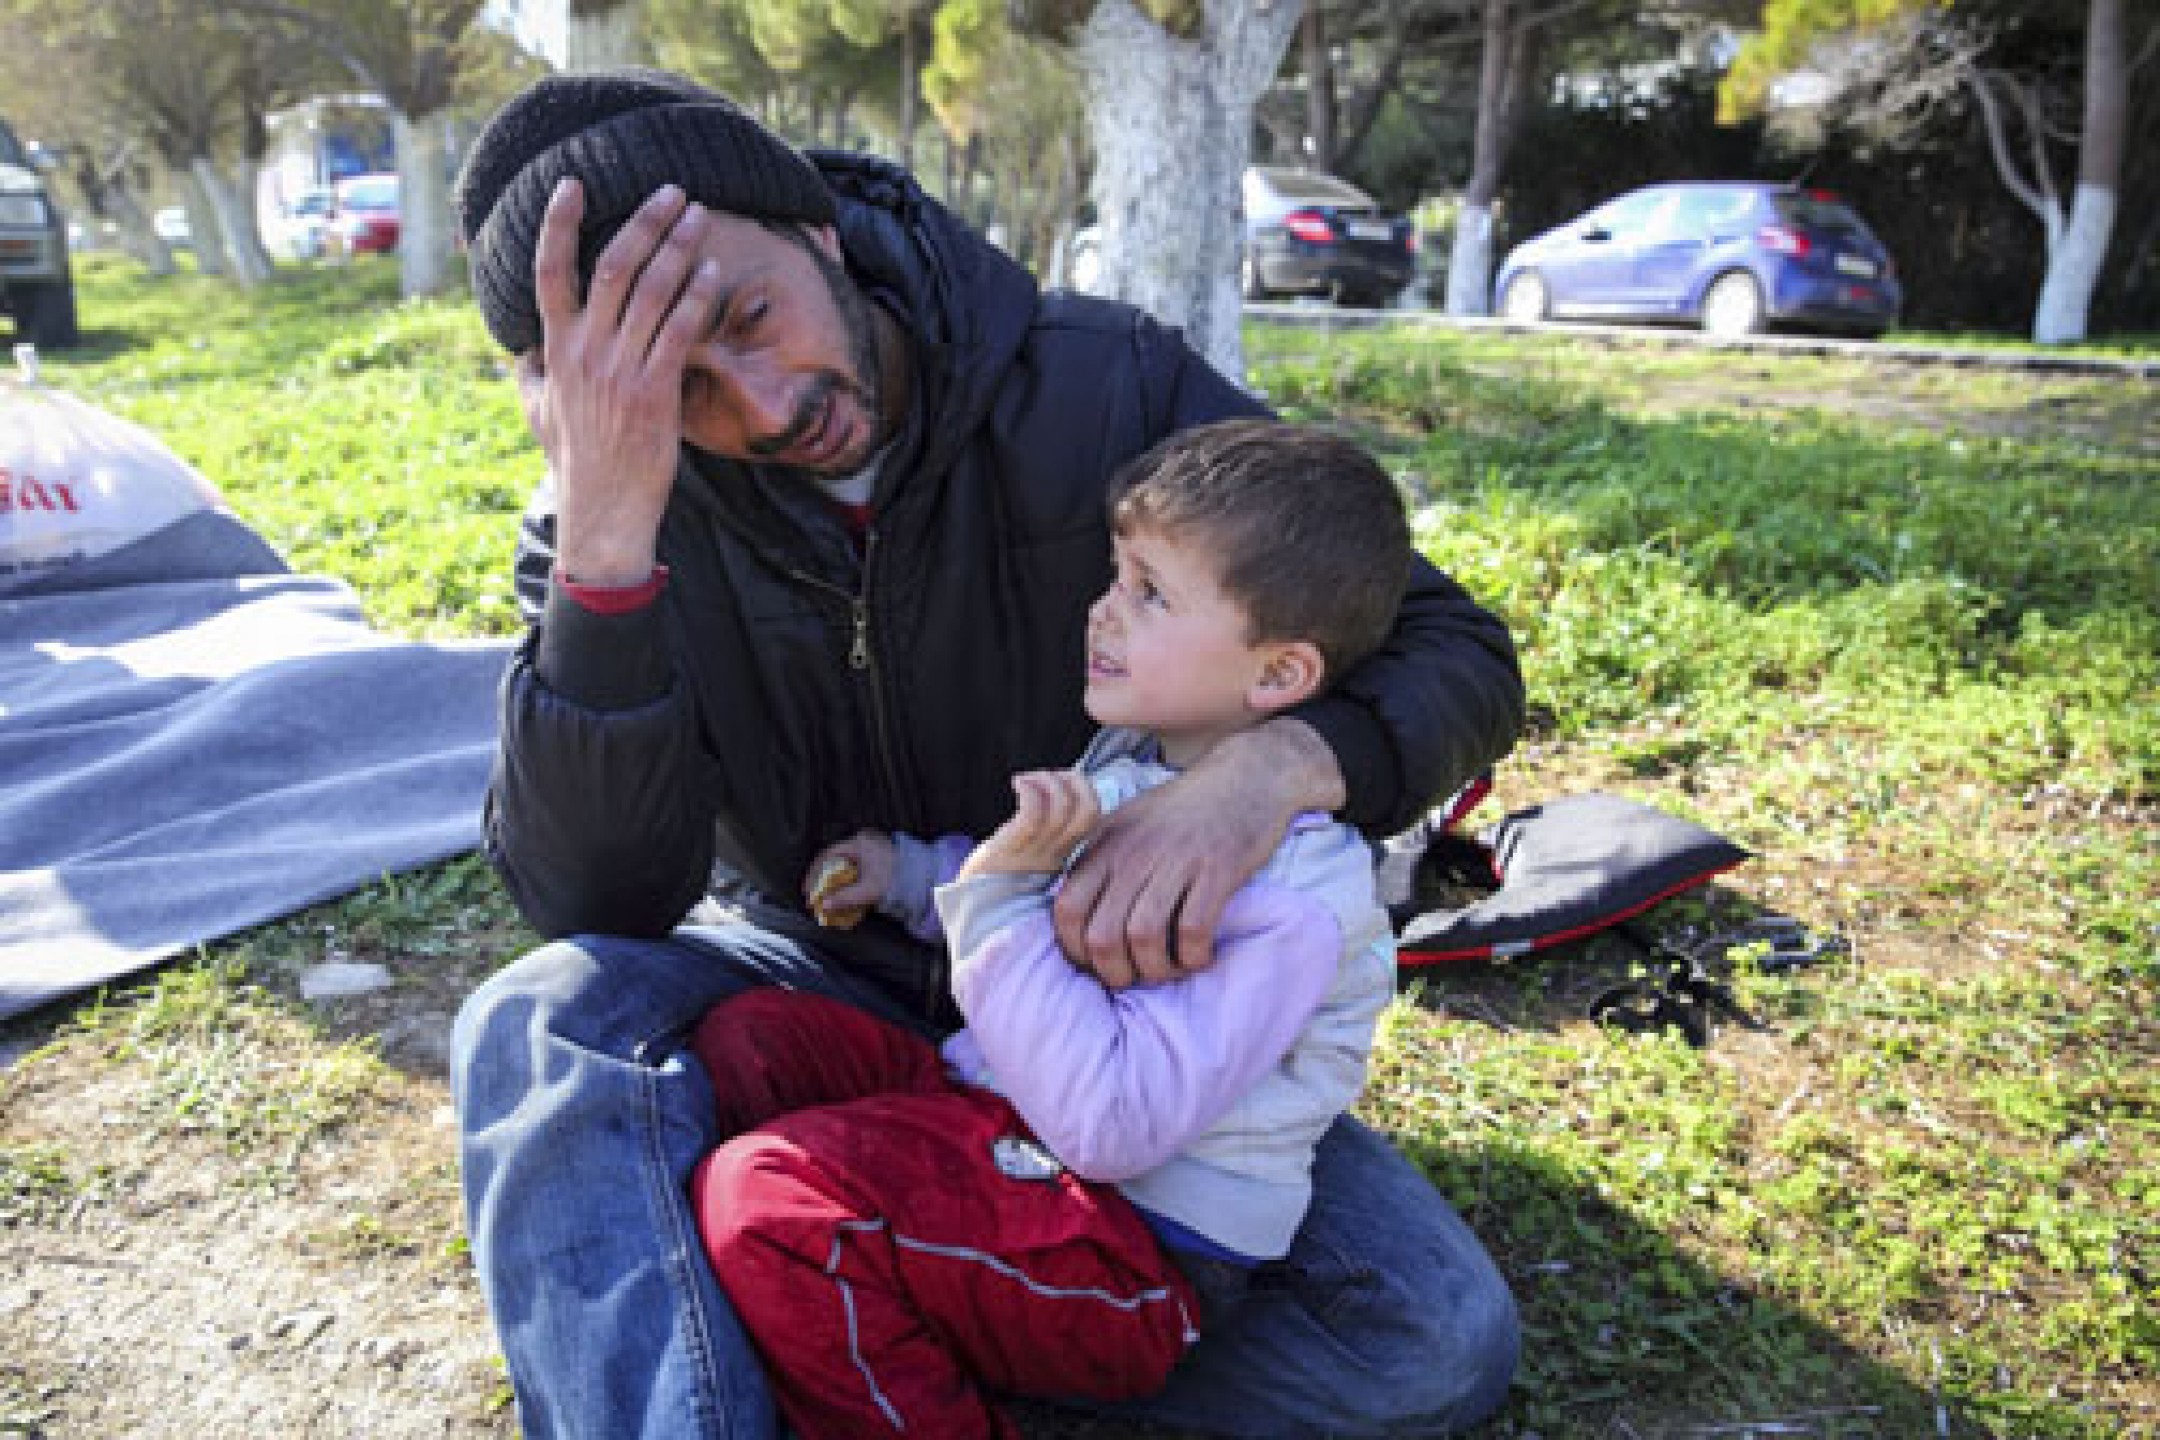 The Refugee Crisis in Greece